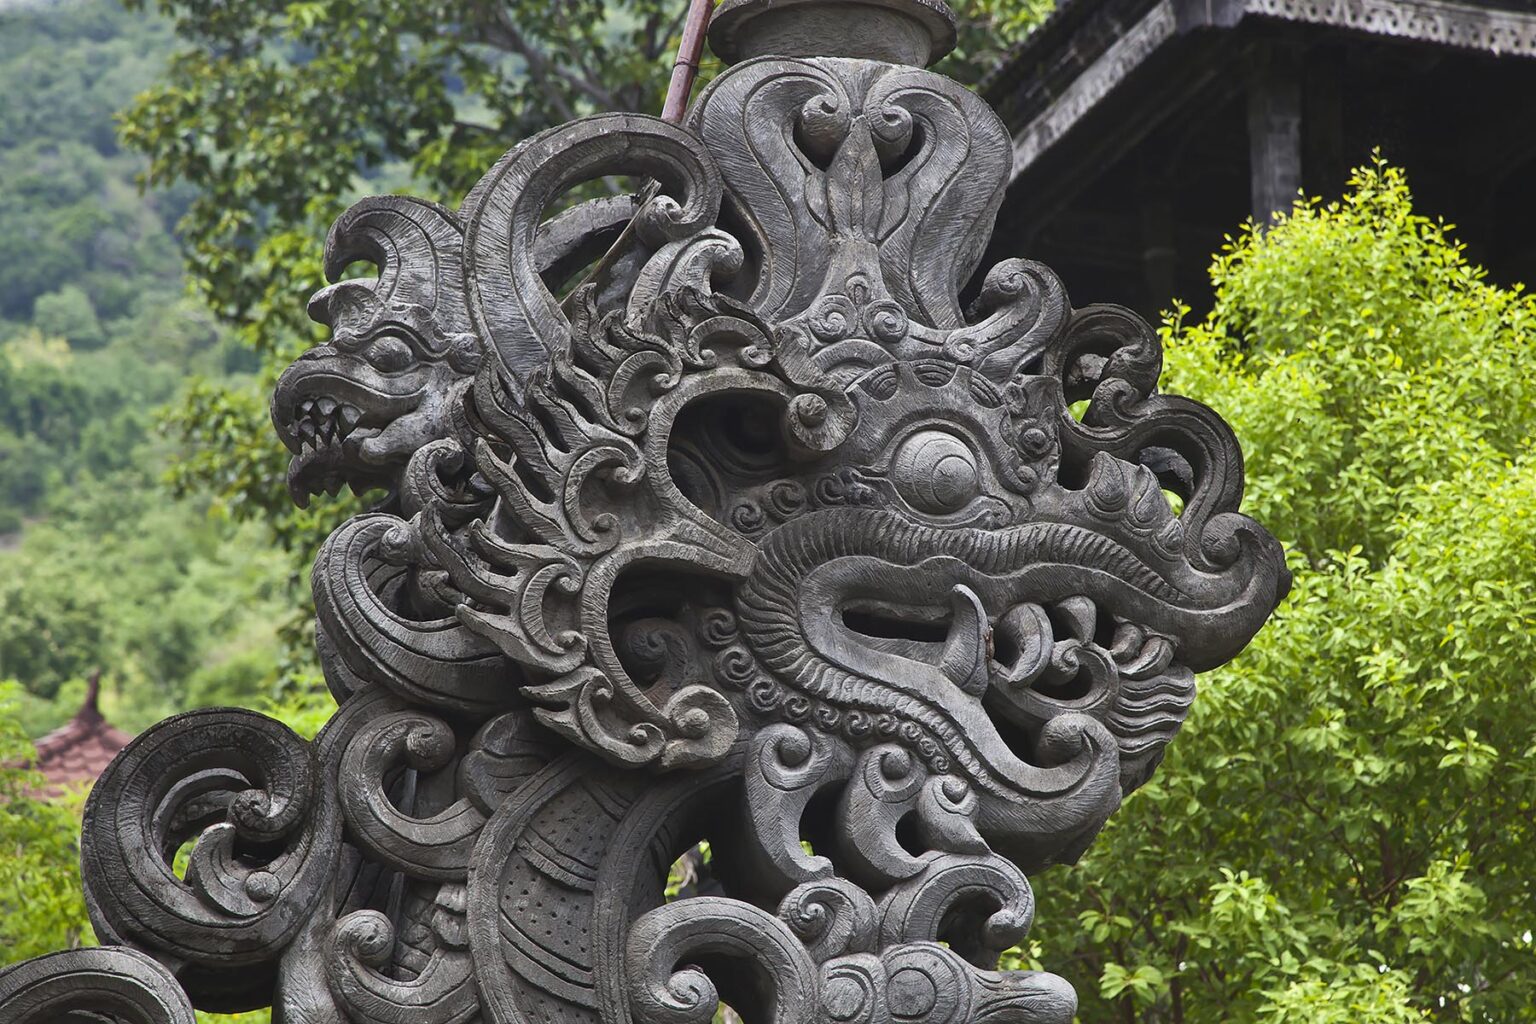 Stone carved dragon at PURA MELANTING a Hindu temple located in a beautiful agriculture valley near PEMUTERAN - BALI, INDONESIA